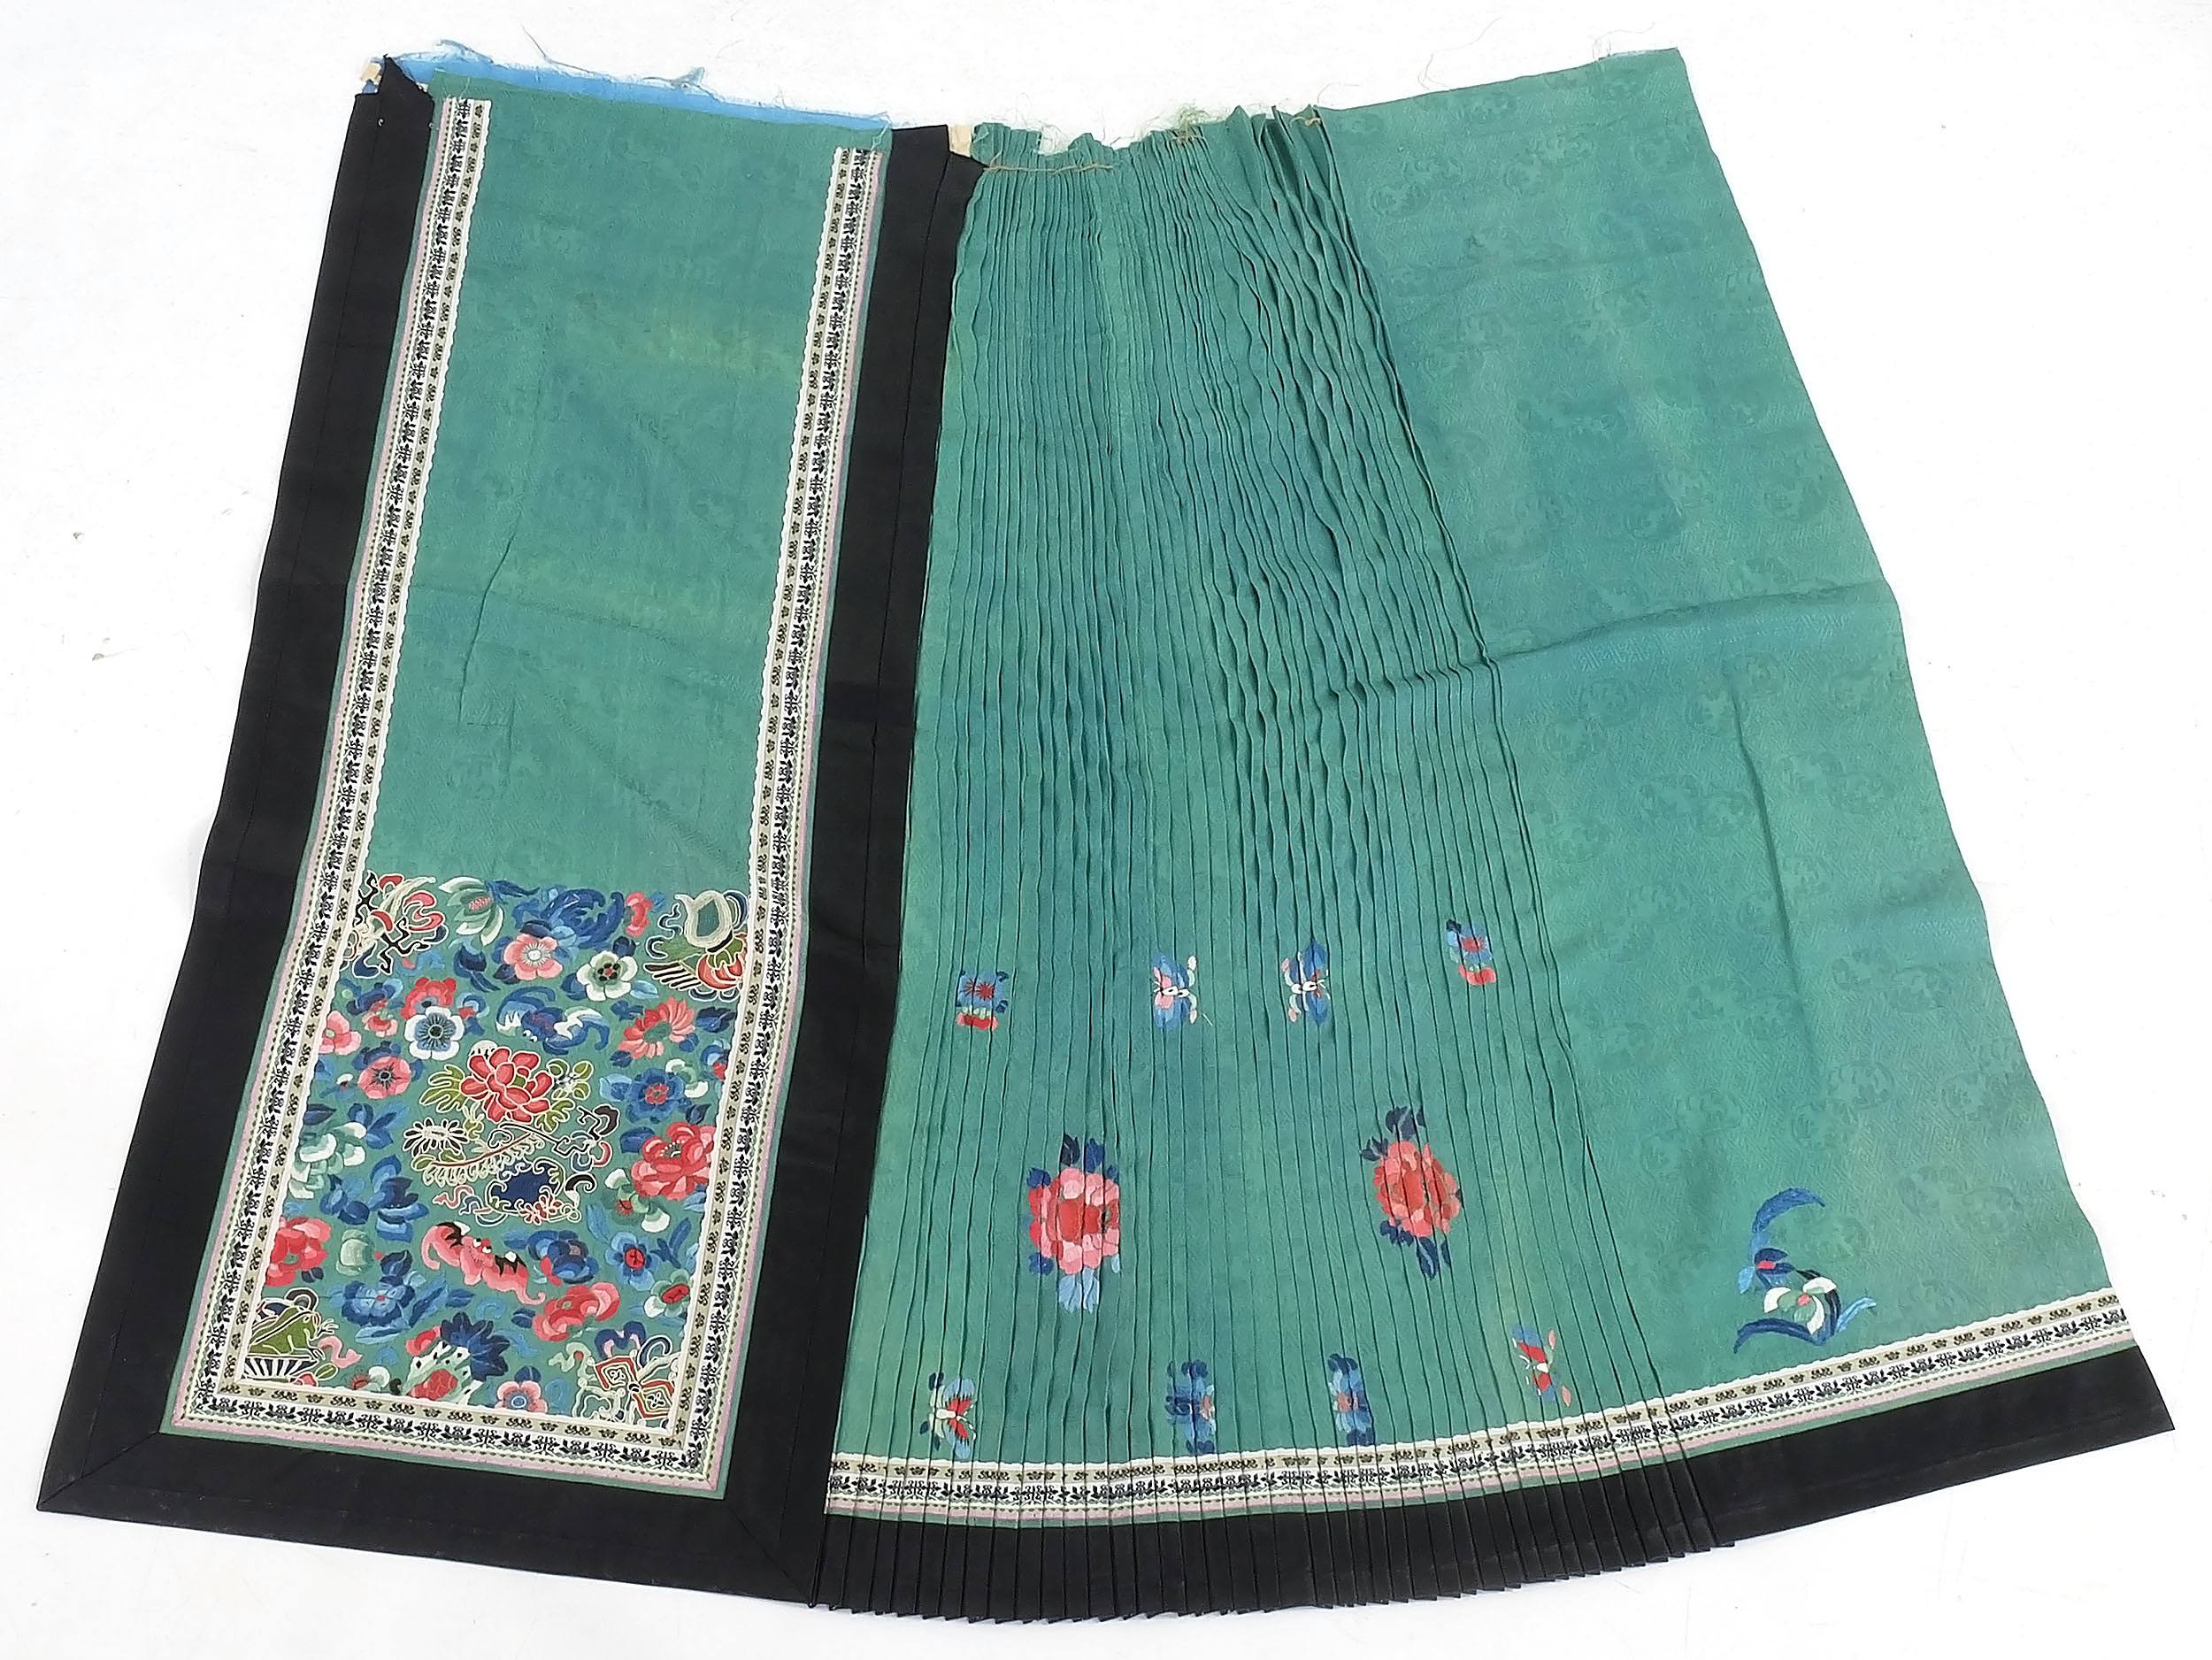 'Chinese Embroidered Teal Colour Damask Silk Skirt Fragment, Late 19th Century'